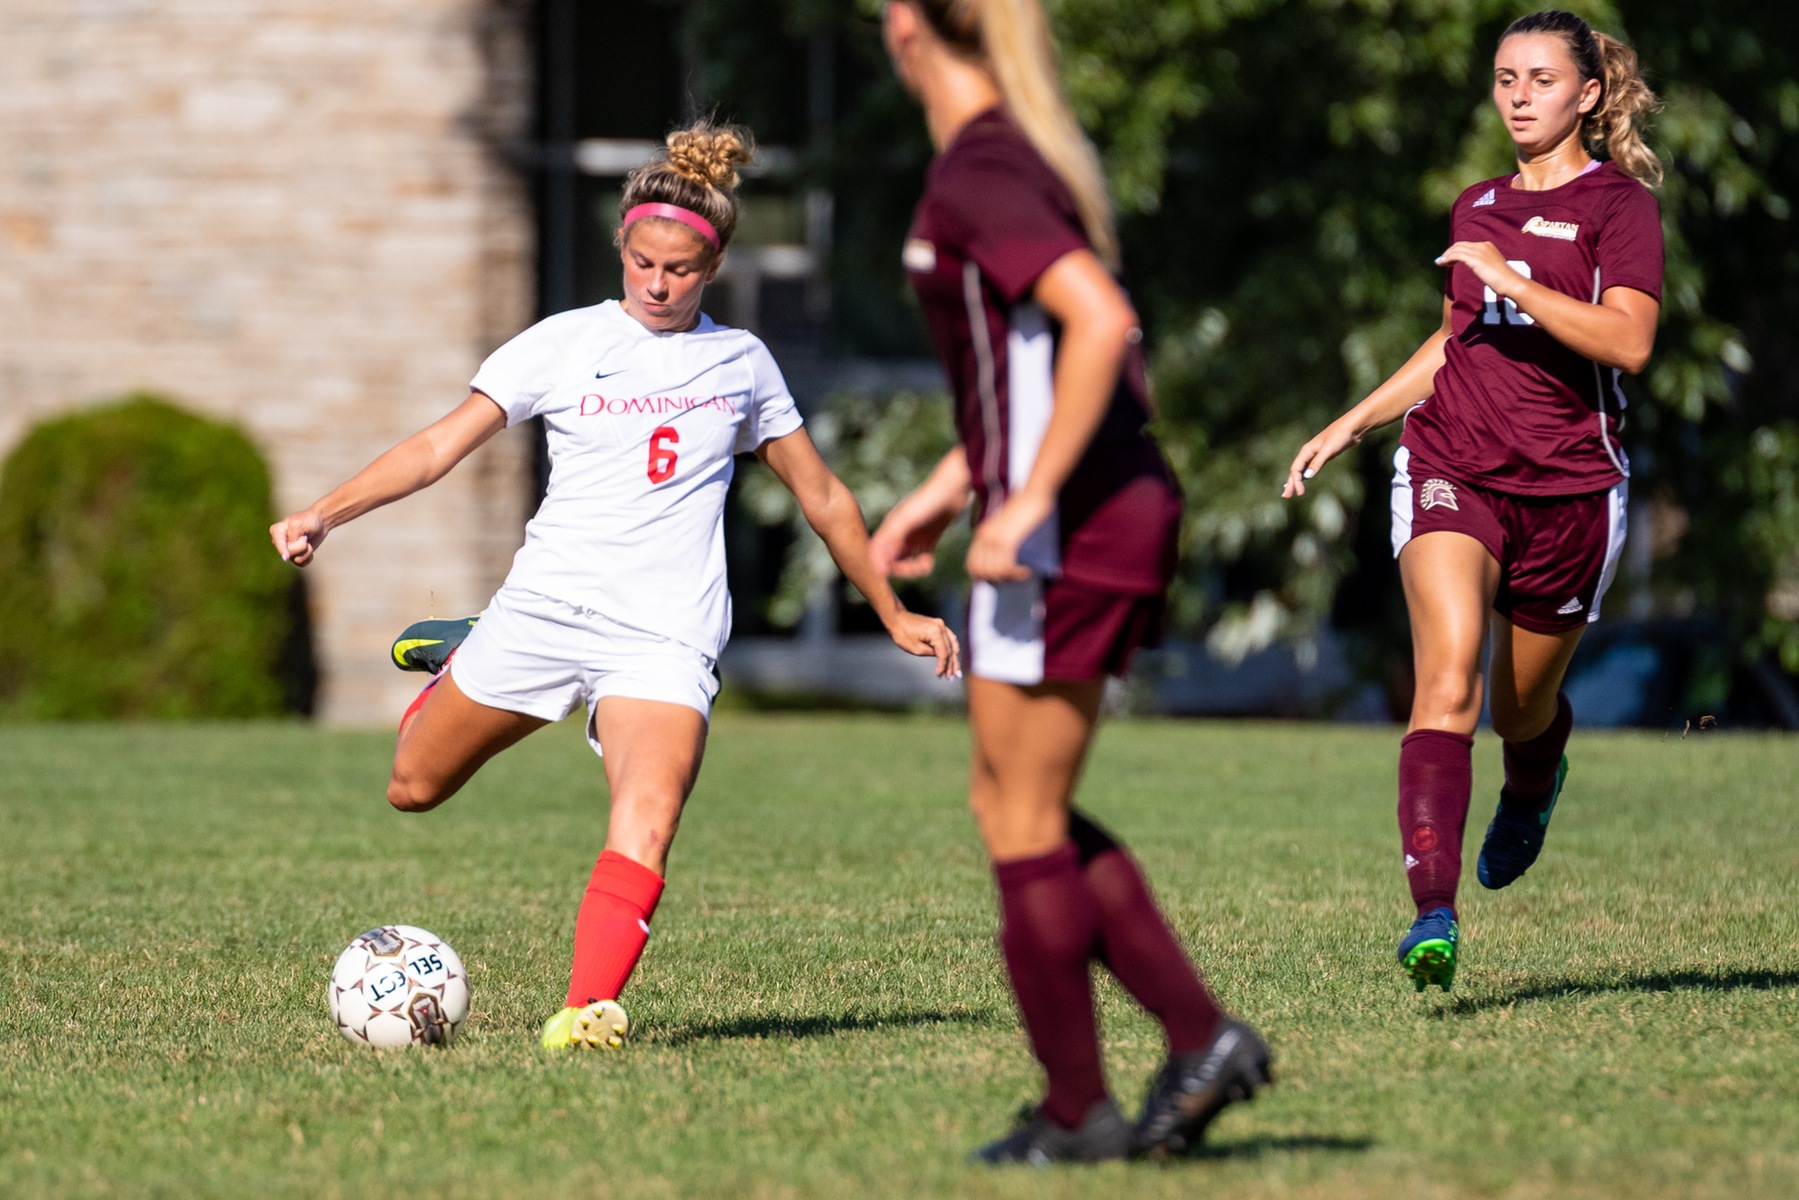 LADY CHARGERS UPEND CHESTNUT HILL COLLEGE